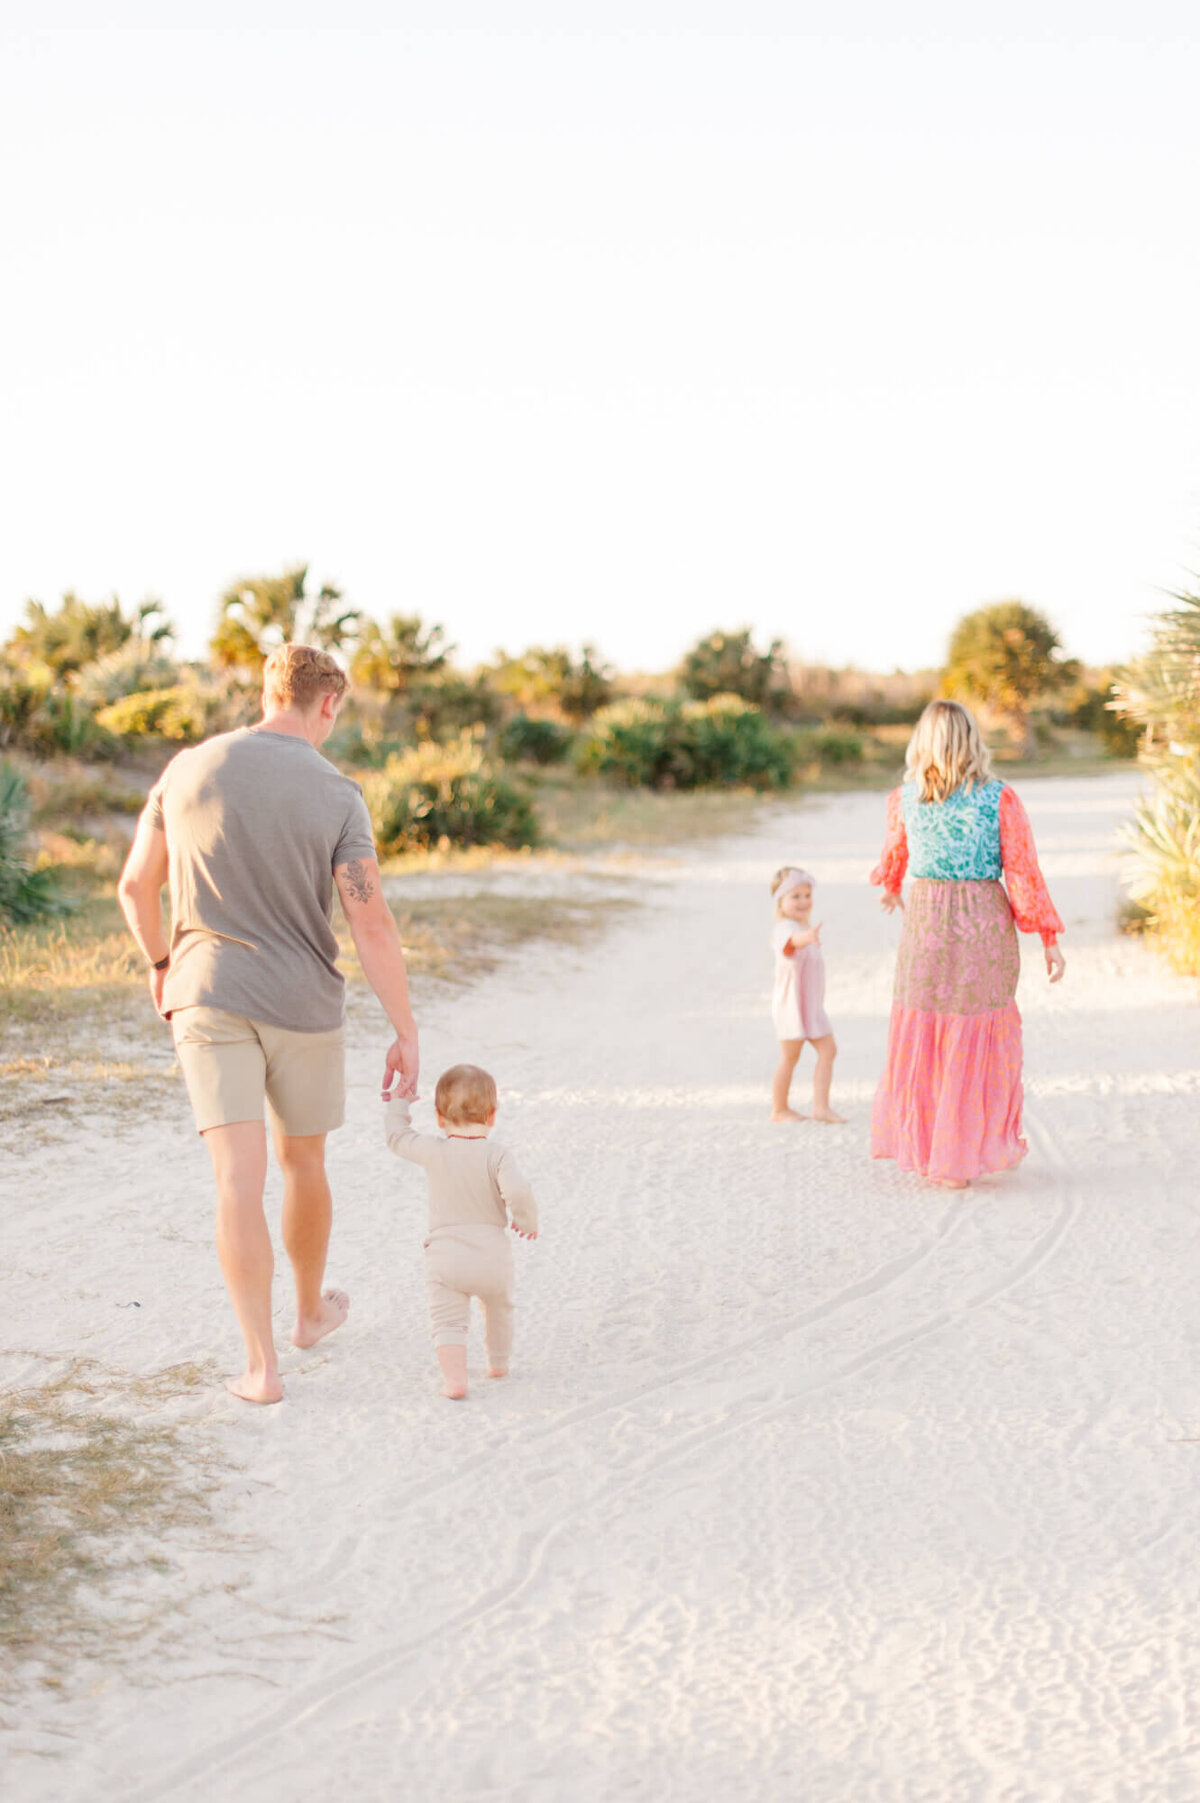 Family walking down a beach path during their Orlando family photography session.